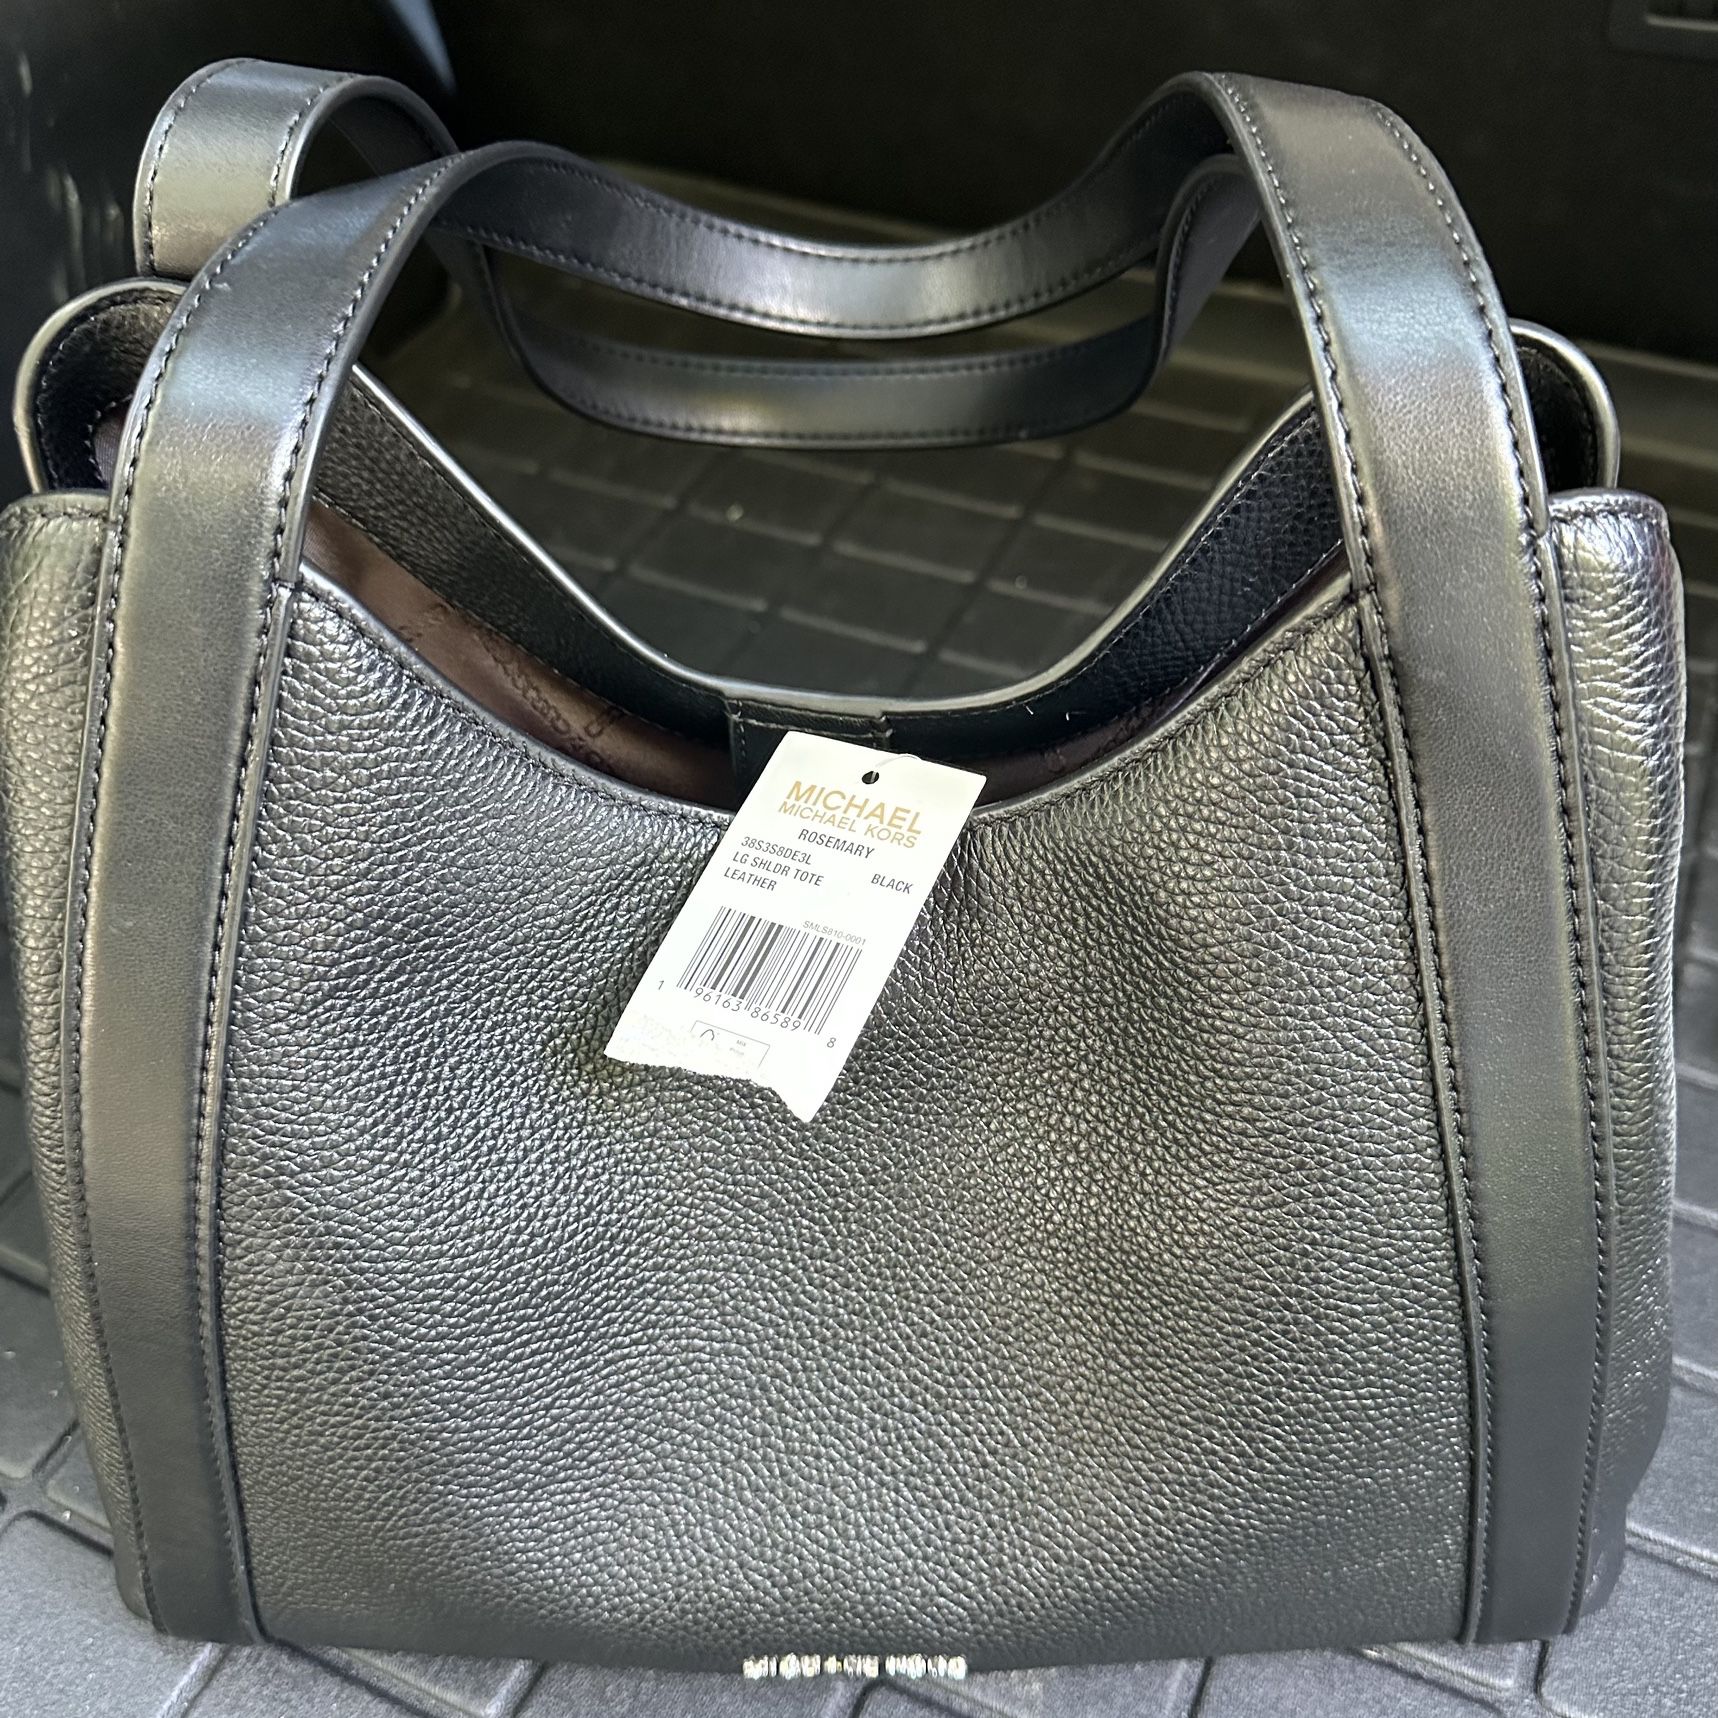 Michael Kors Bucket Bag for Sale in Humble, TX - OfferUp